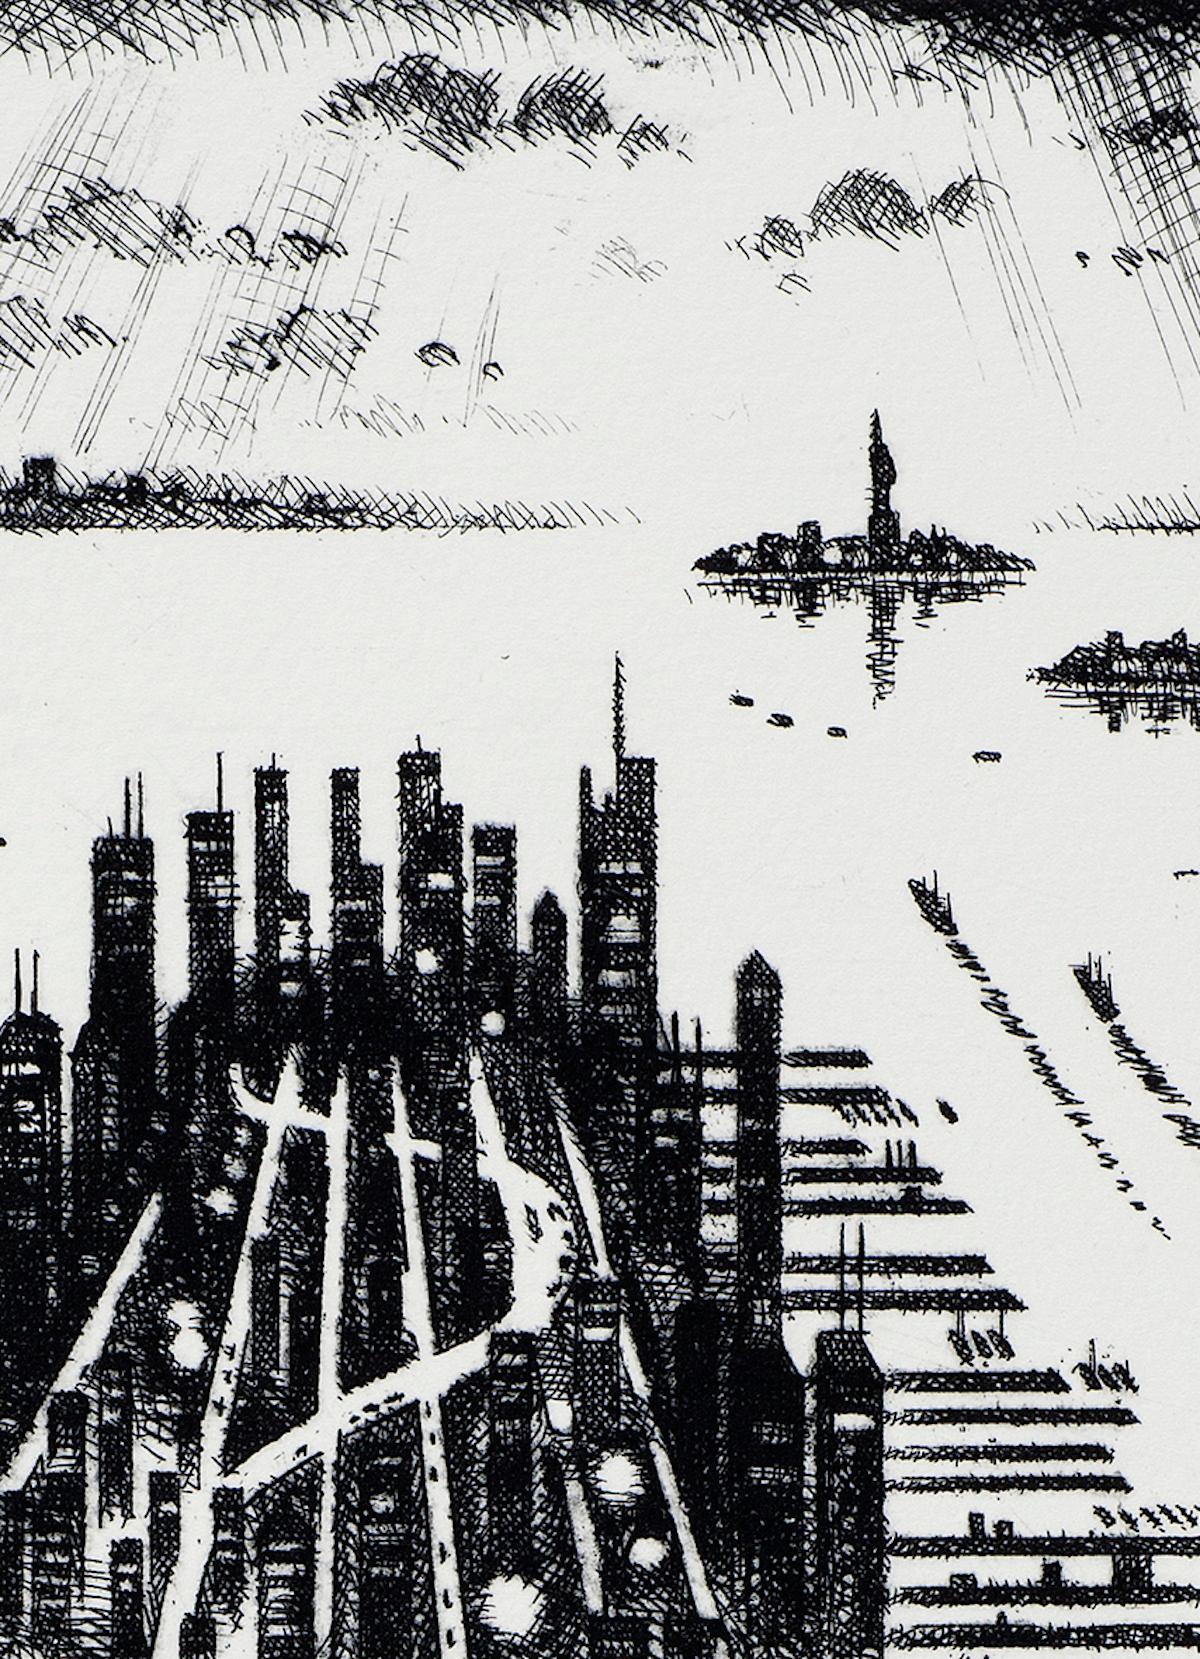 New York by John Duffin [2019]

limited_edition
Etching on paper
Edition number 5/150
Image size: H:38 cm x W:25 cm
Complete Size of Unframed Work: H:38 cm x W:25 cm x D:1cm
Sold Unframed
Please note that insitu images are purely an indication of